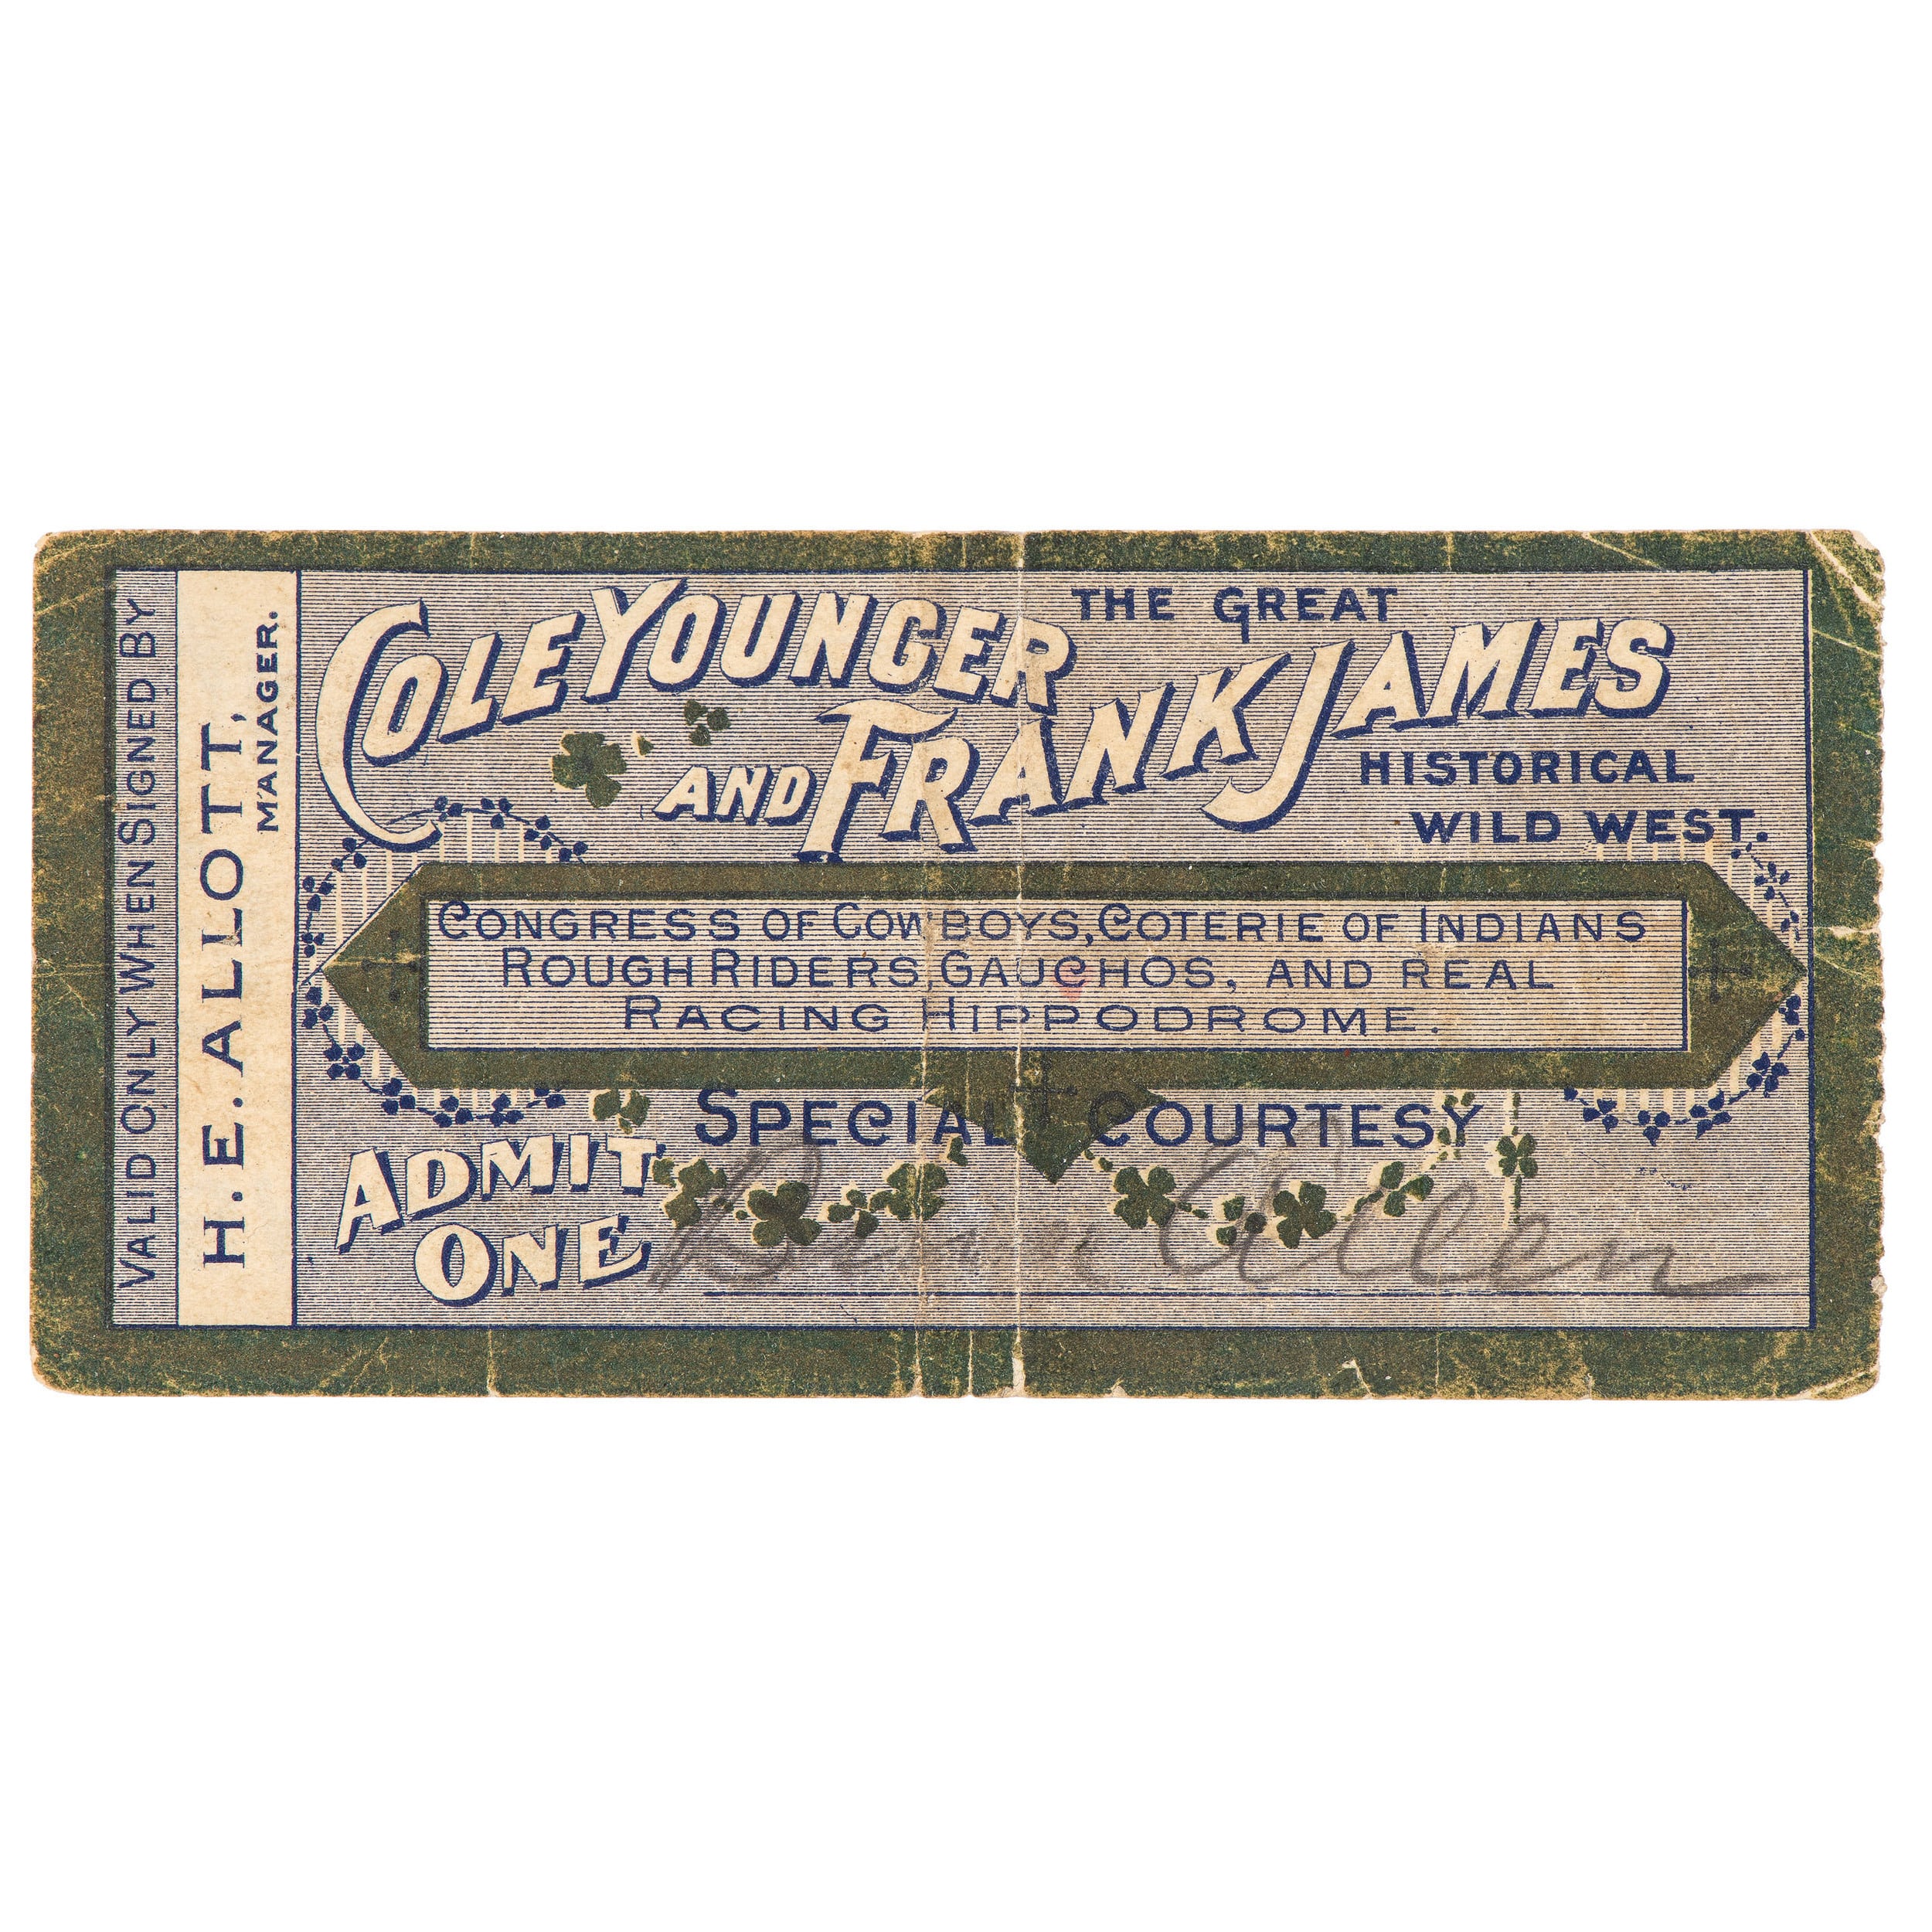 " The Great Cole Younger and Frank James Historical Wild West"  Ticket ...